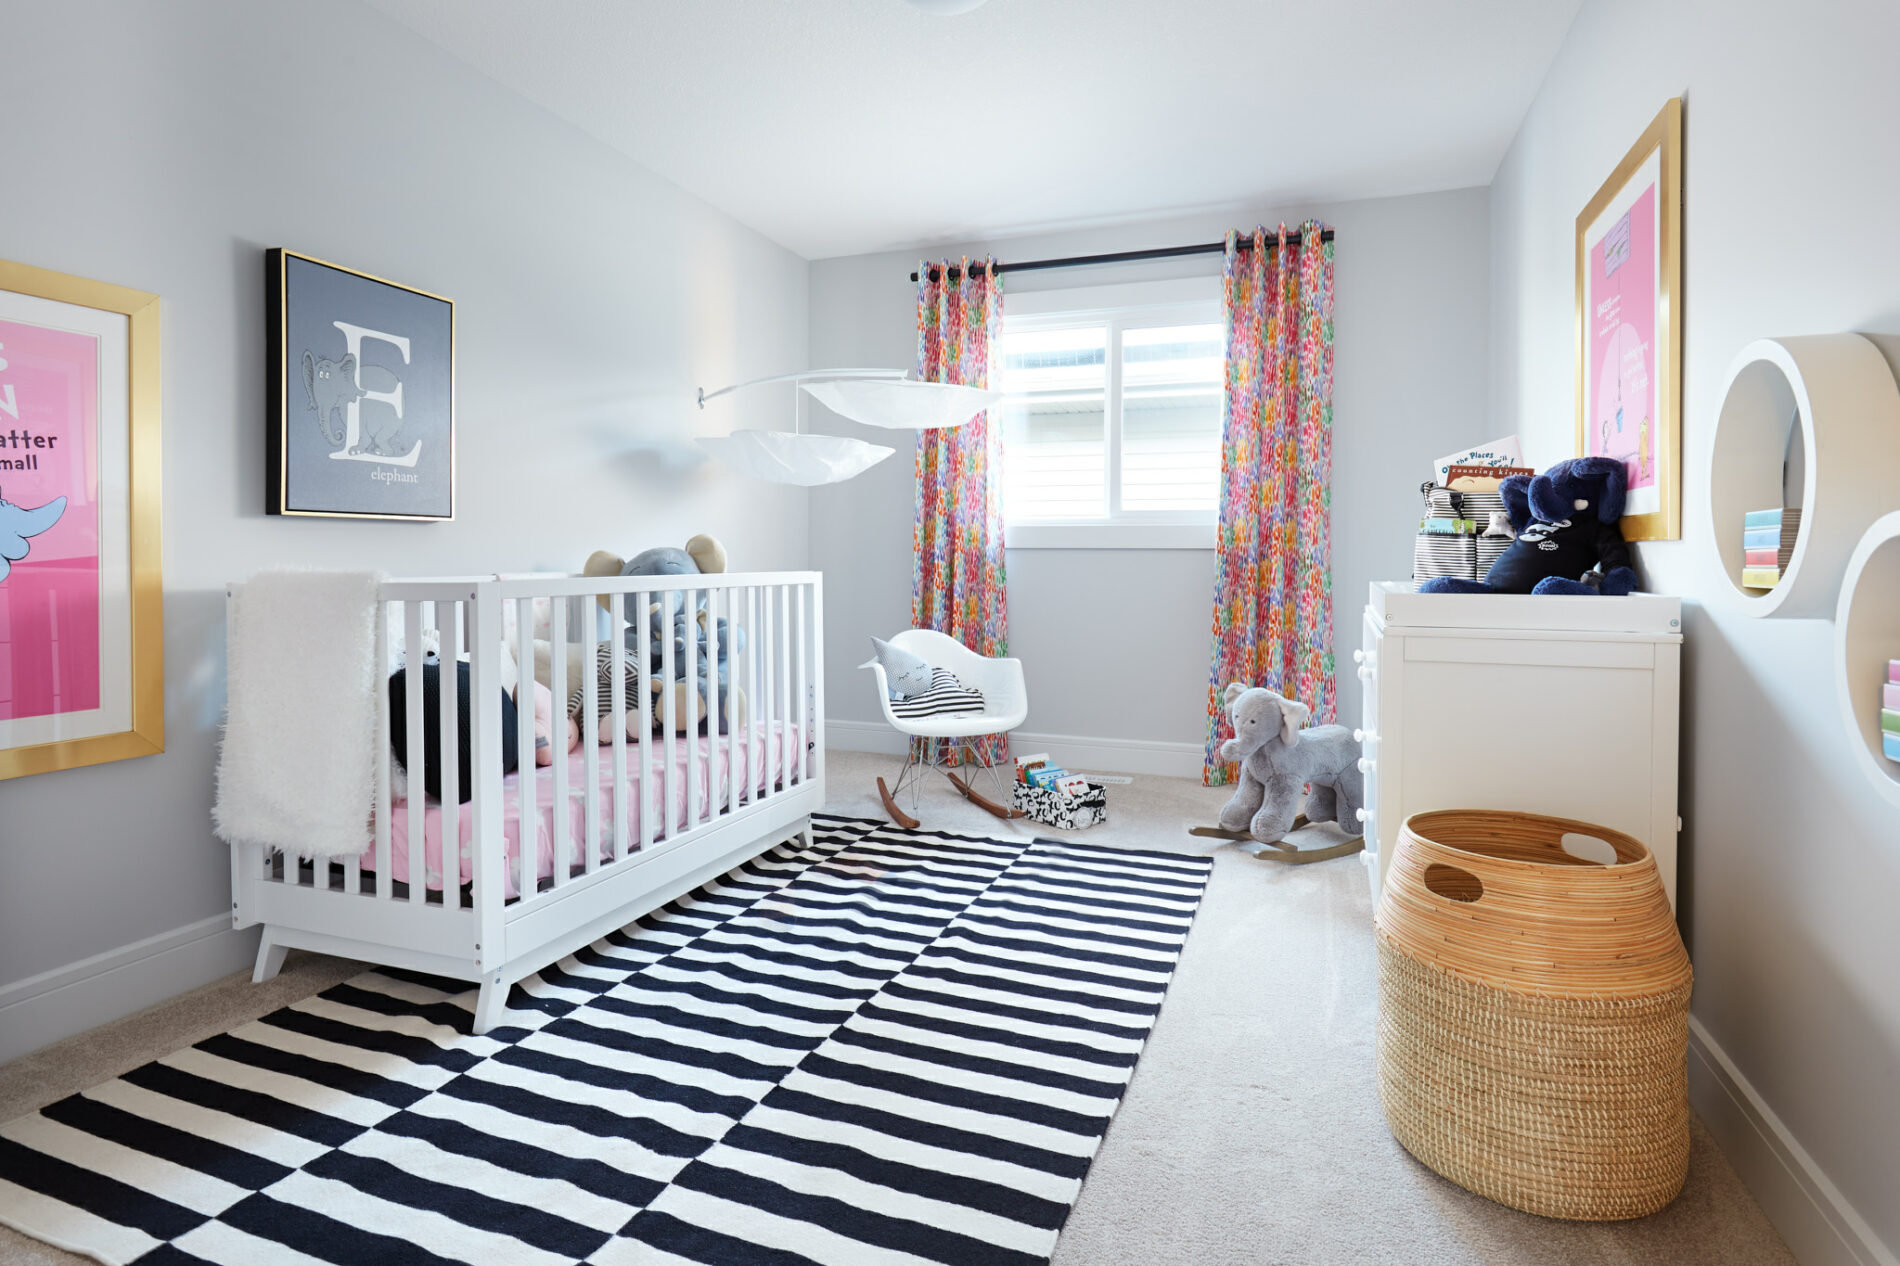 A minimalistic nursery with black and white checkered area rug, white crib and dresser with pink accents in bedding and curtains